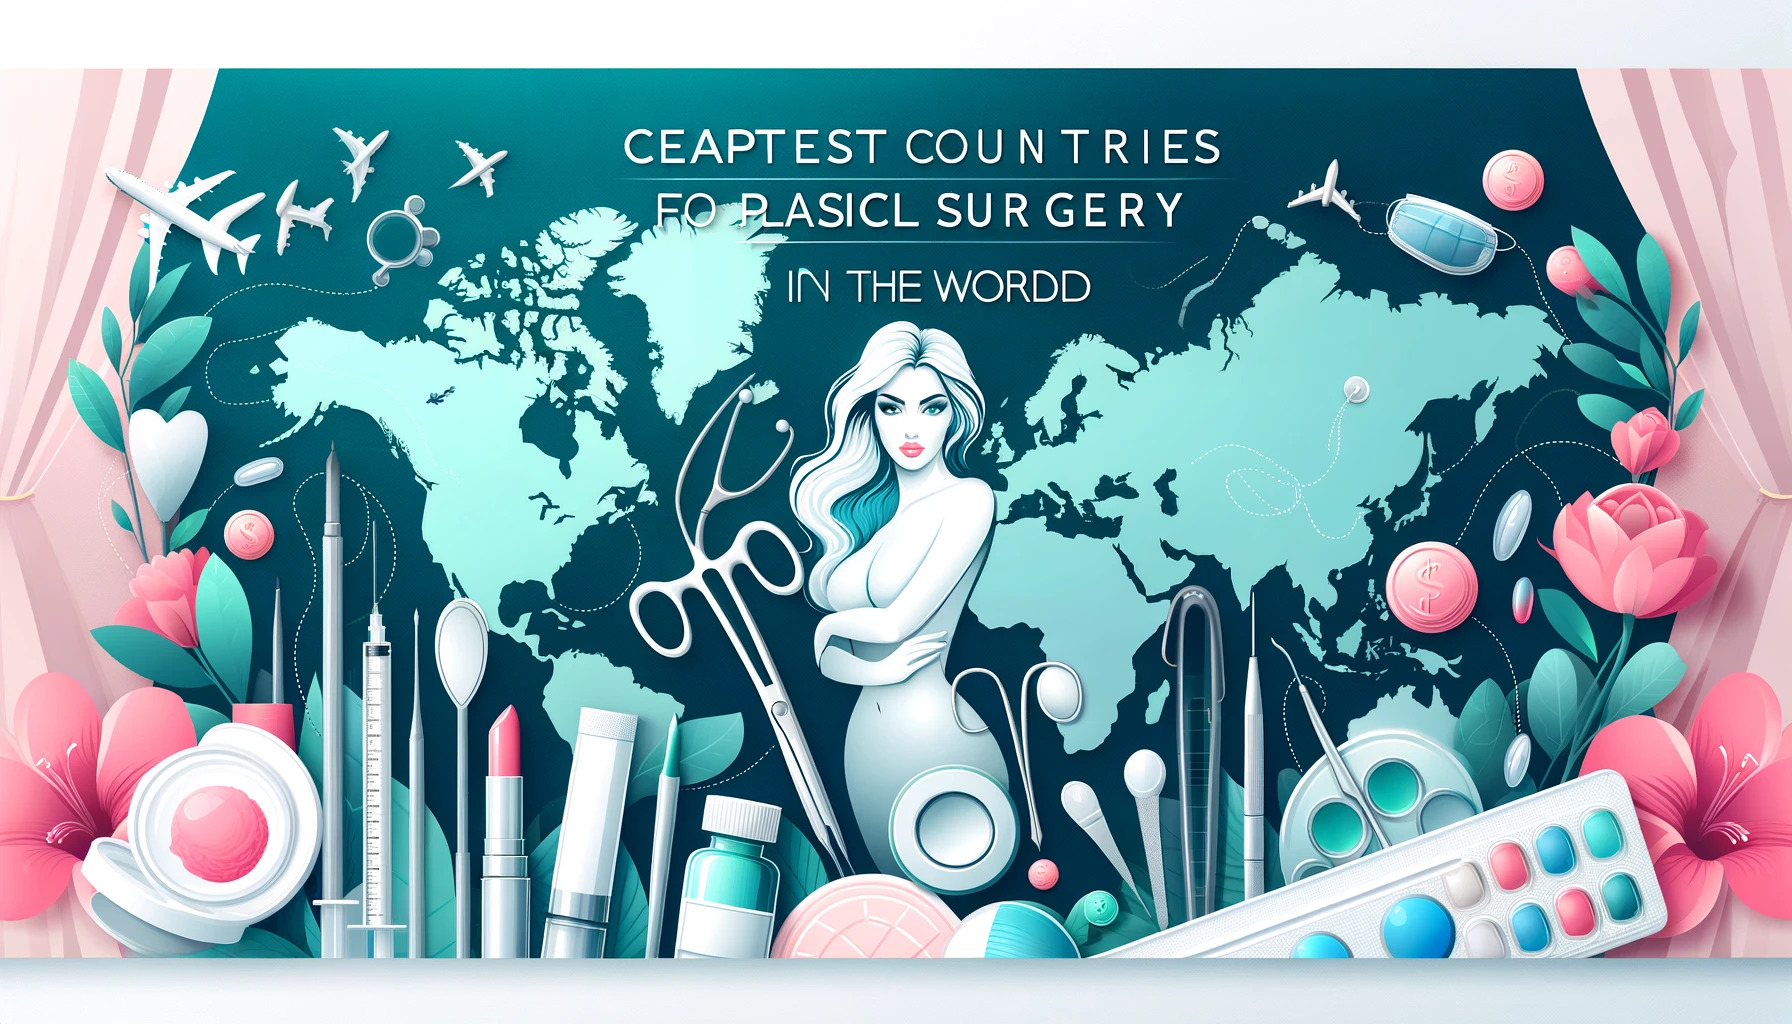 You are currently viewing Cheapest Countries for Plastic Surgery in the World